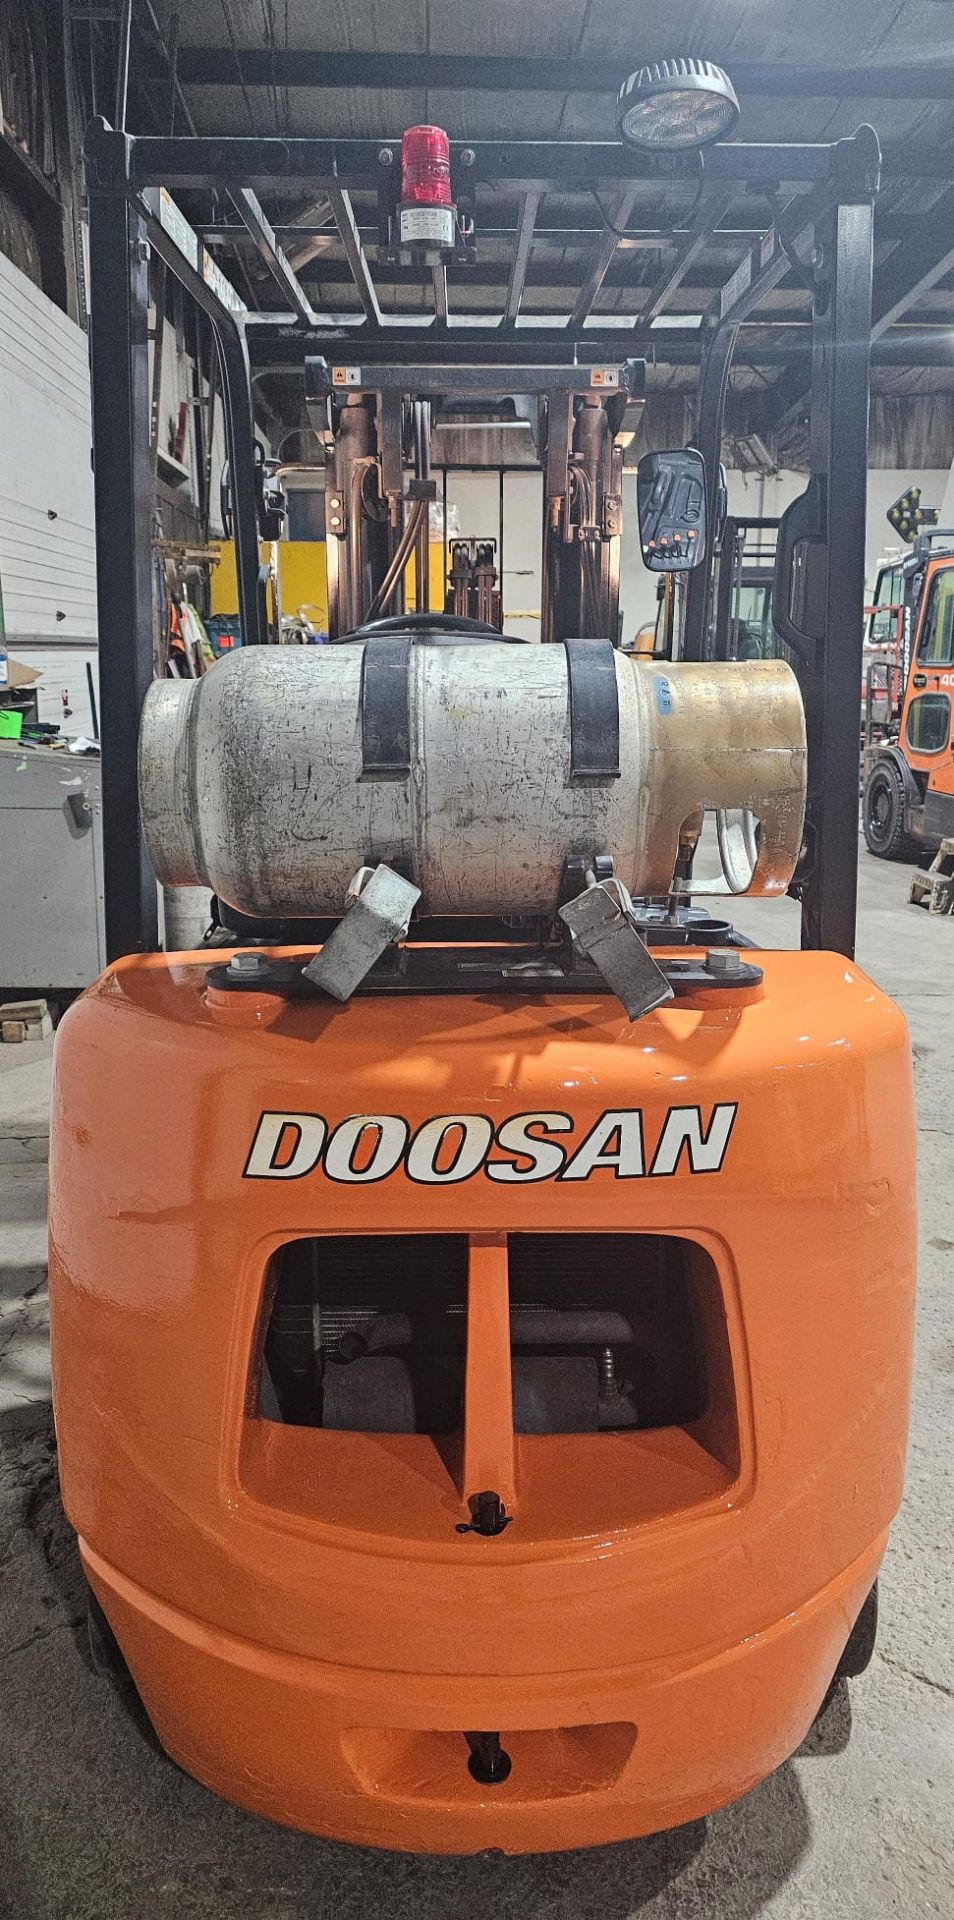 2017 DOOSAN 6,000lbs Capacity LPG (Propane) Forklift with sideshift & 3-STAGE MAST 189" load - Image 5 of 9